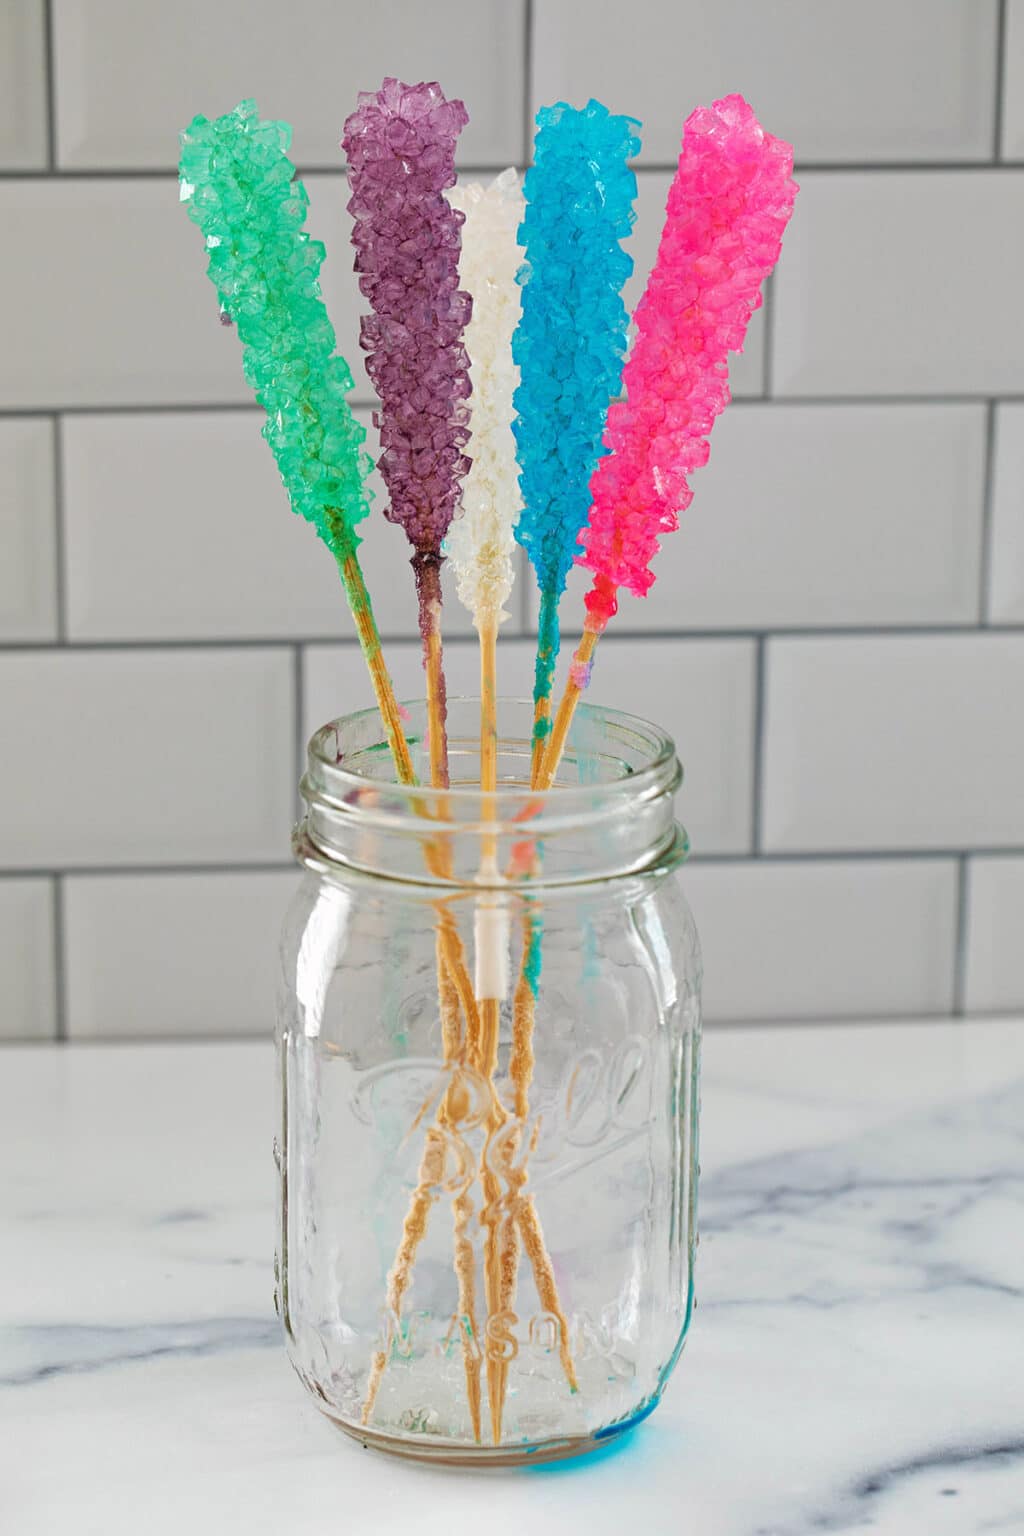 How to Make Rock Candy {DIY Project} | We are not Martha